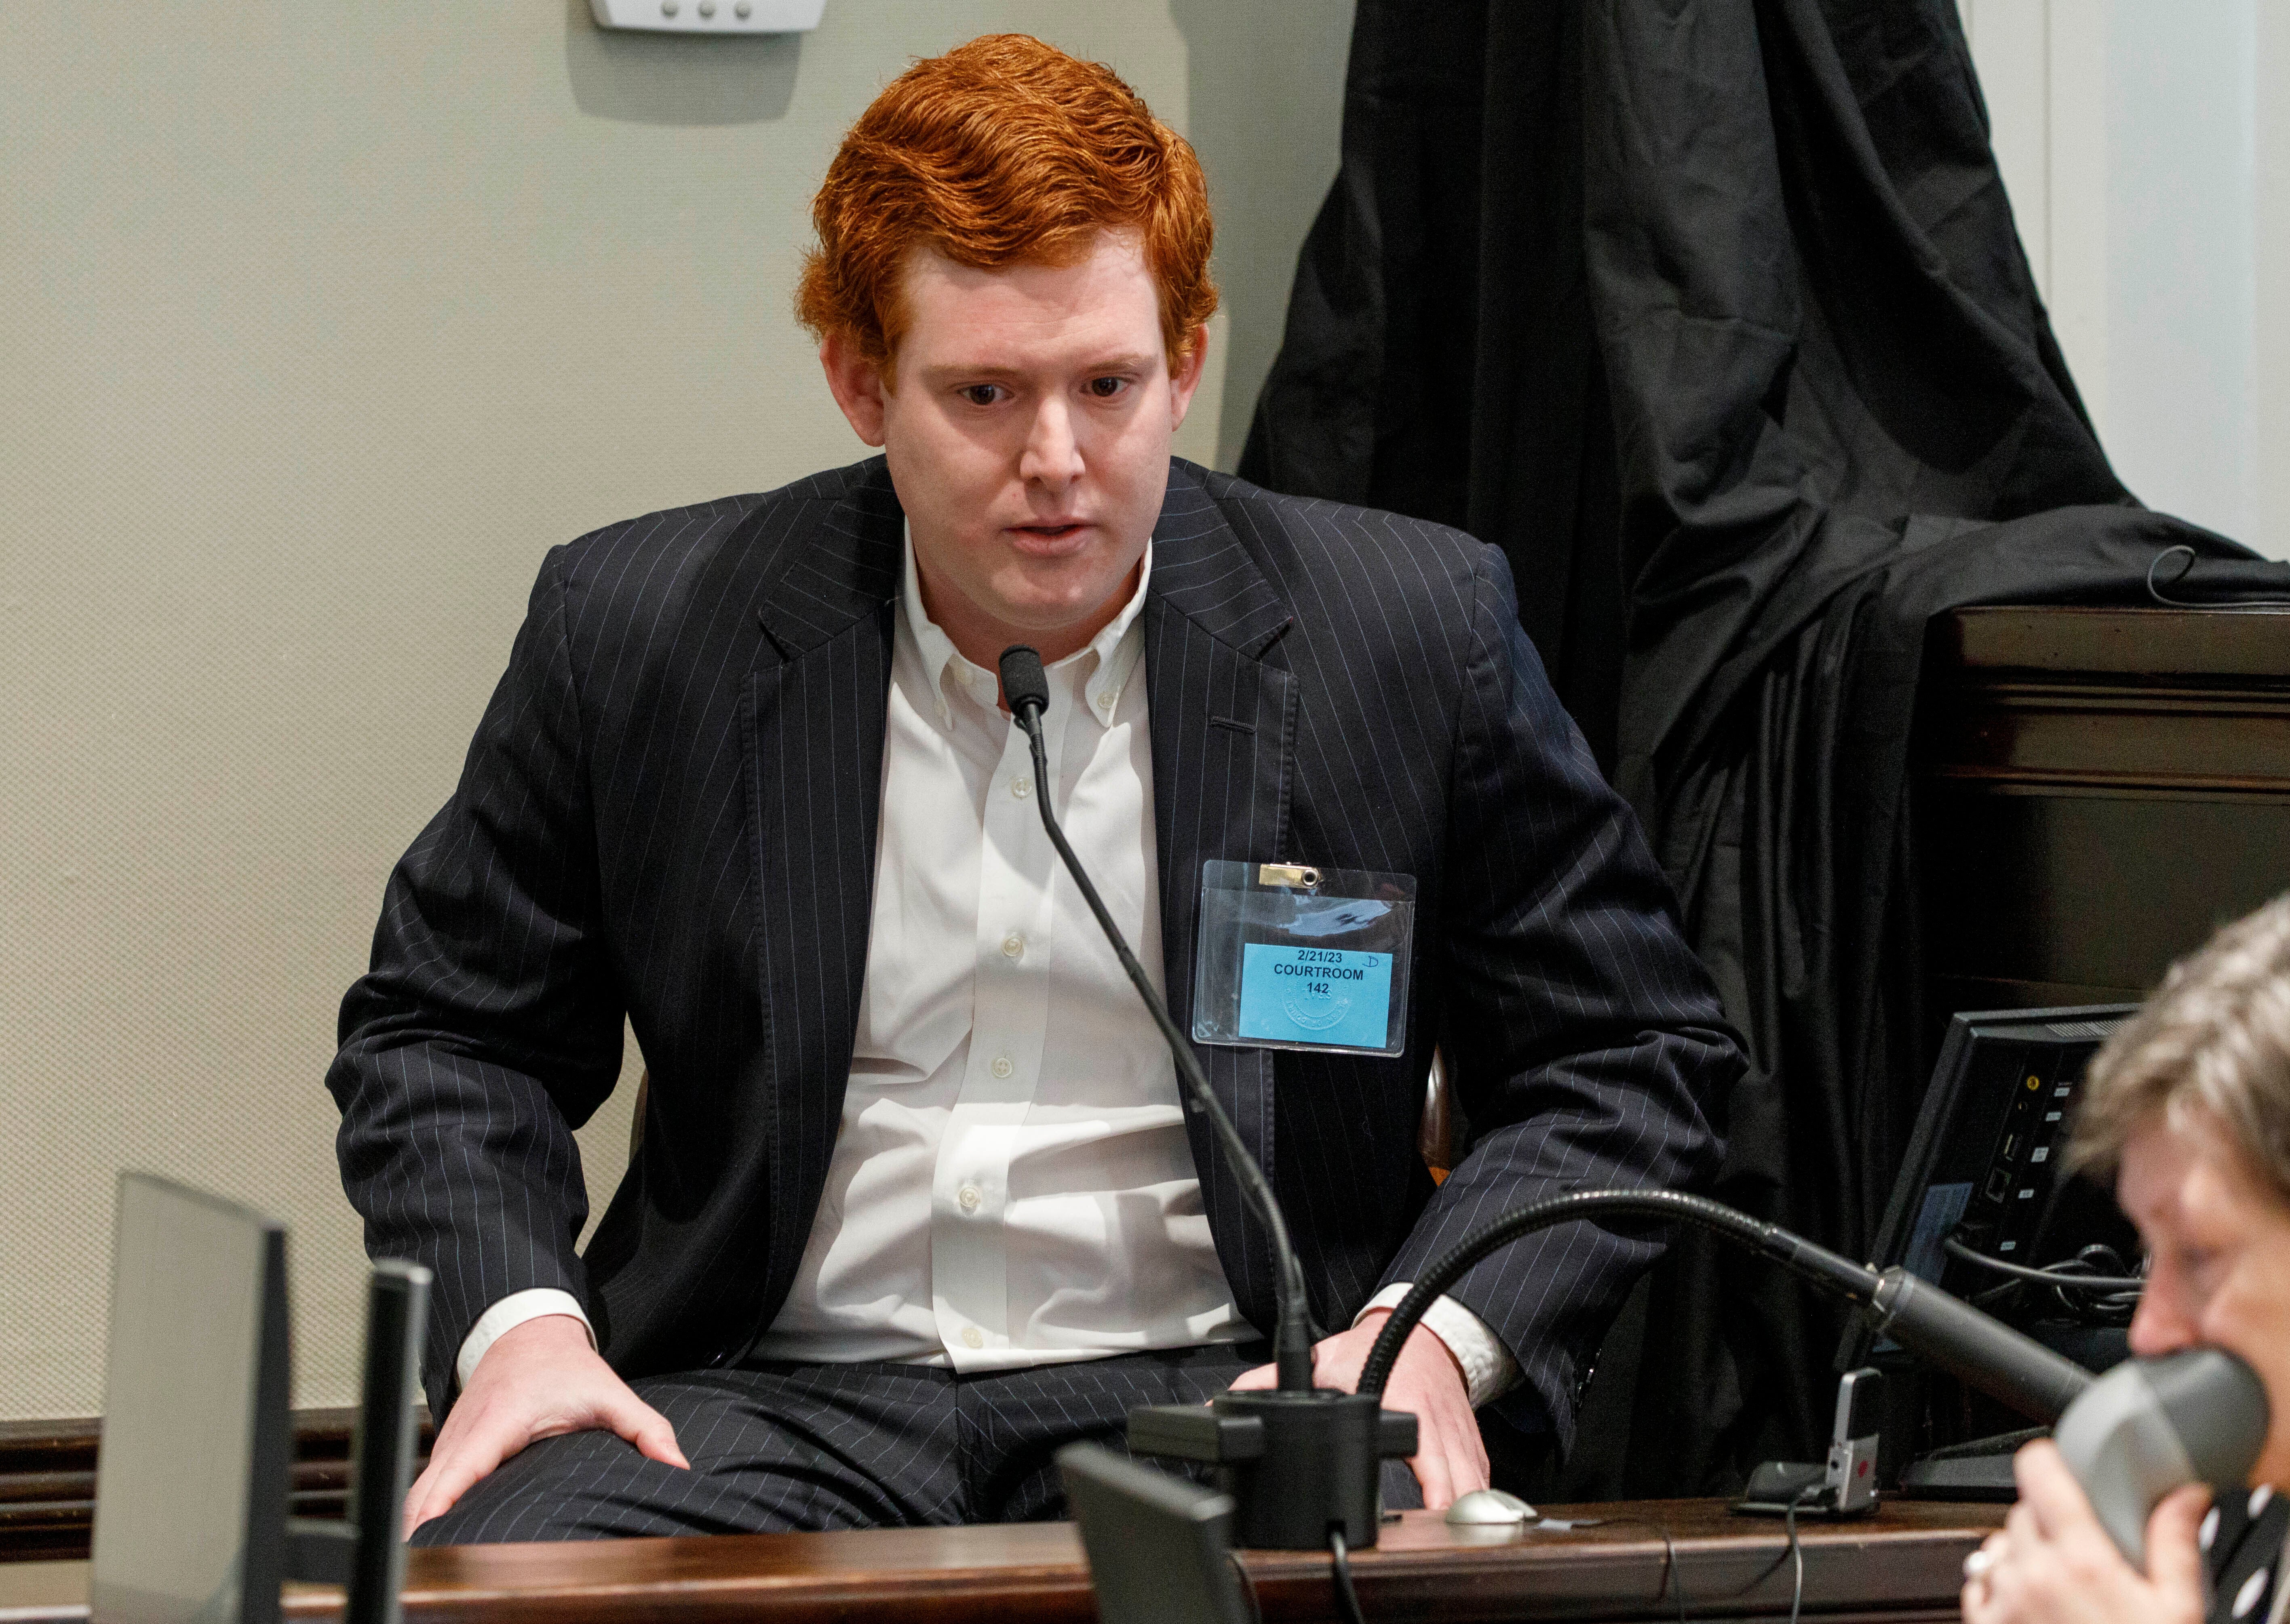 Buster Murdaugh, the son of Alex Murdaugh, testifies during his father’s trial